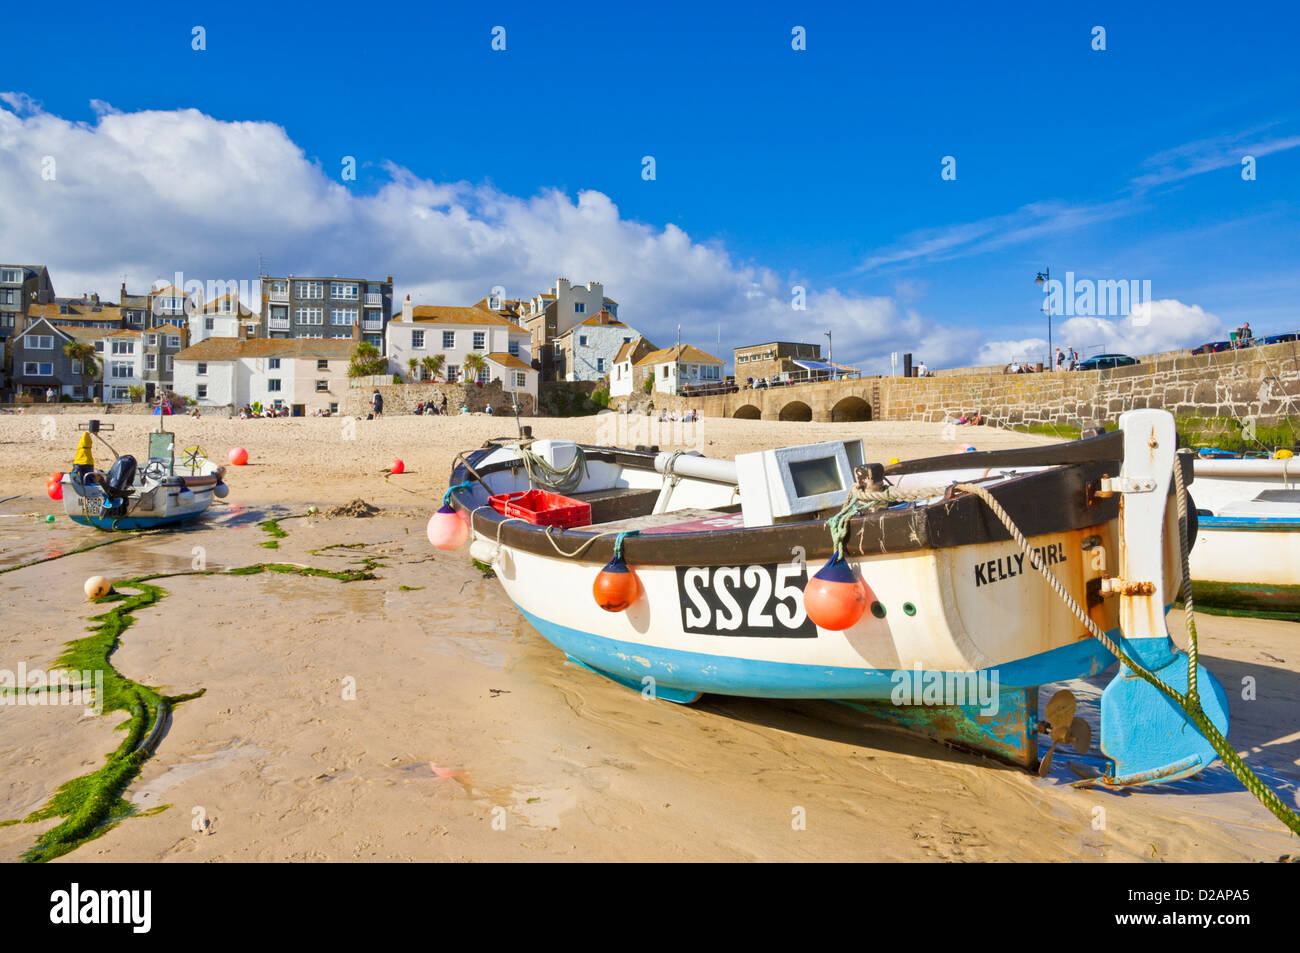 Traditionelle Fischerboote bei Ebbe am Strand in St Ives Hafen Cornwall England UK GB EU Europa Stockfoto